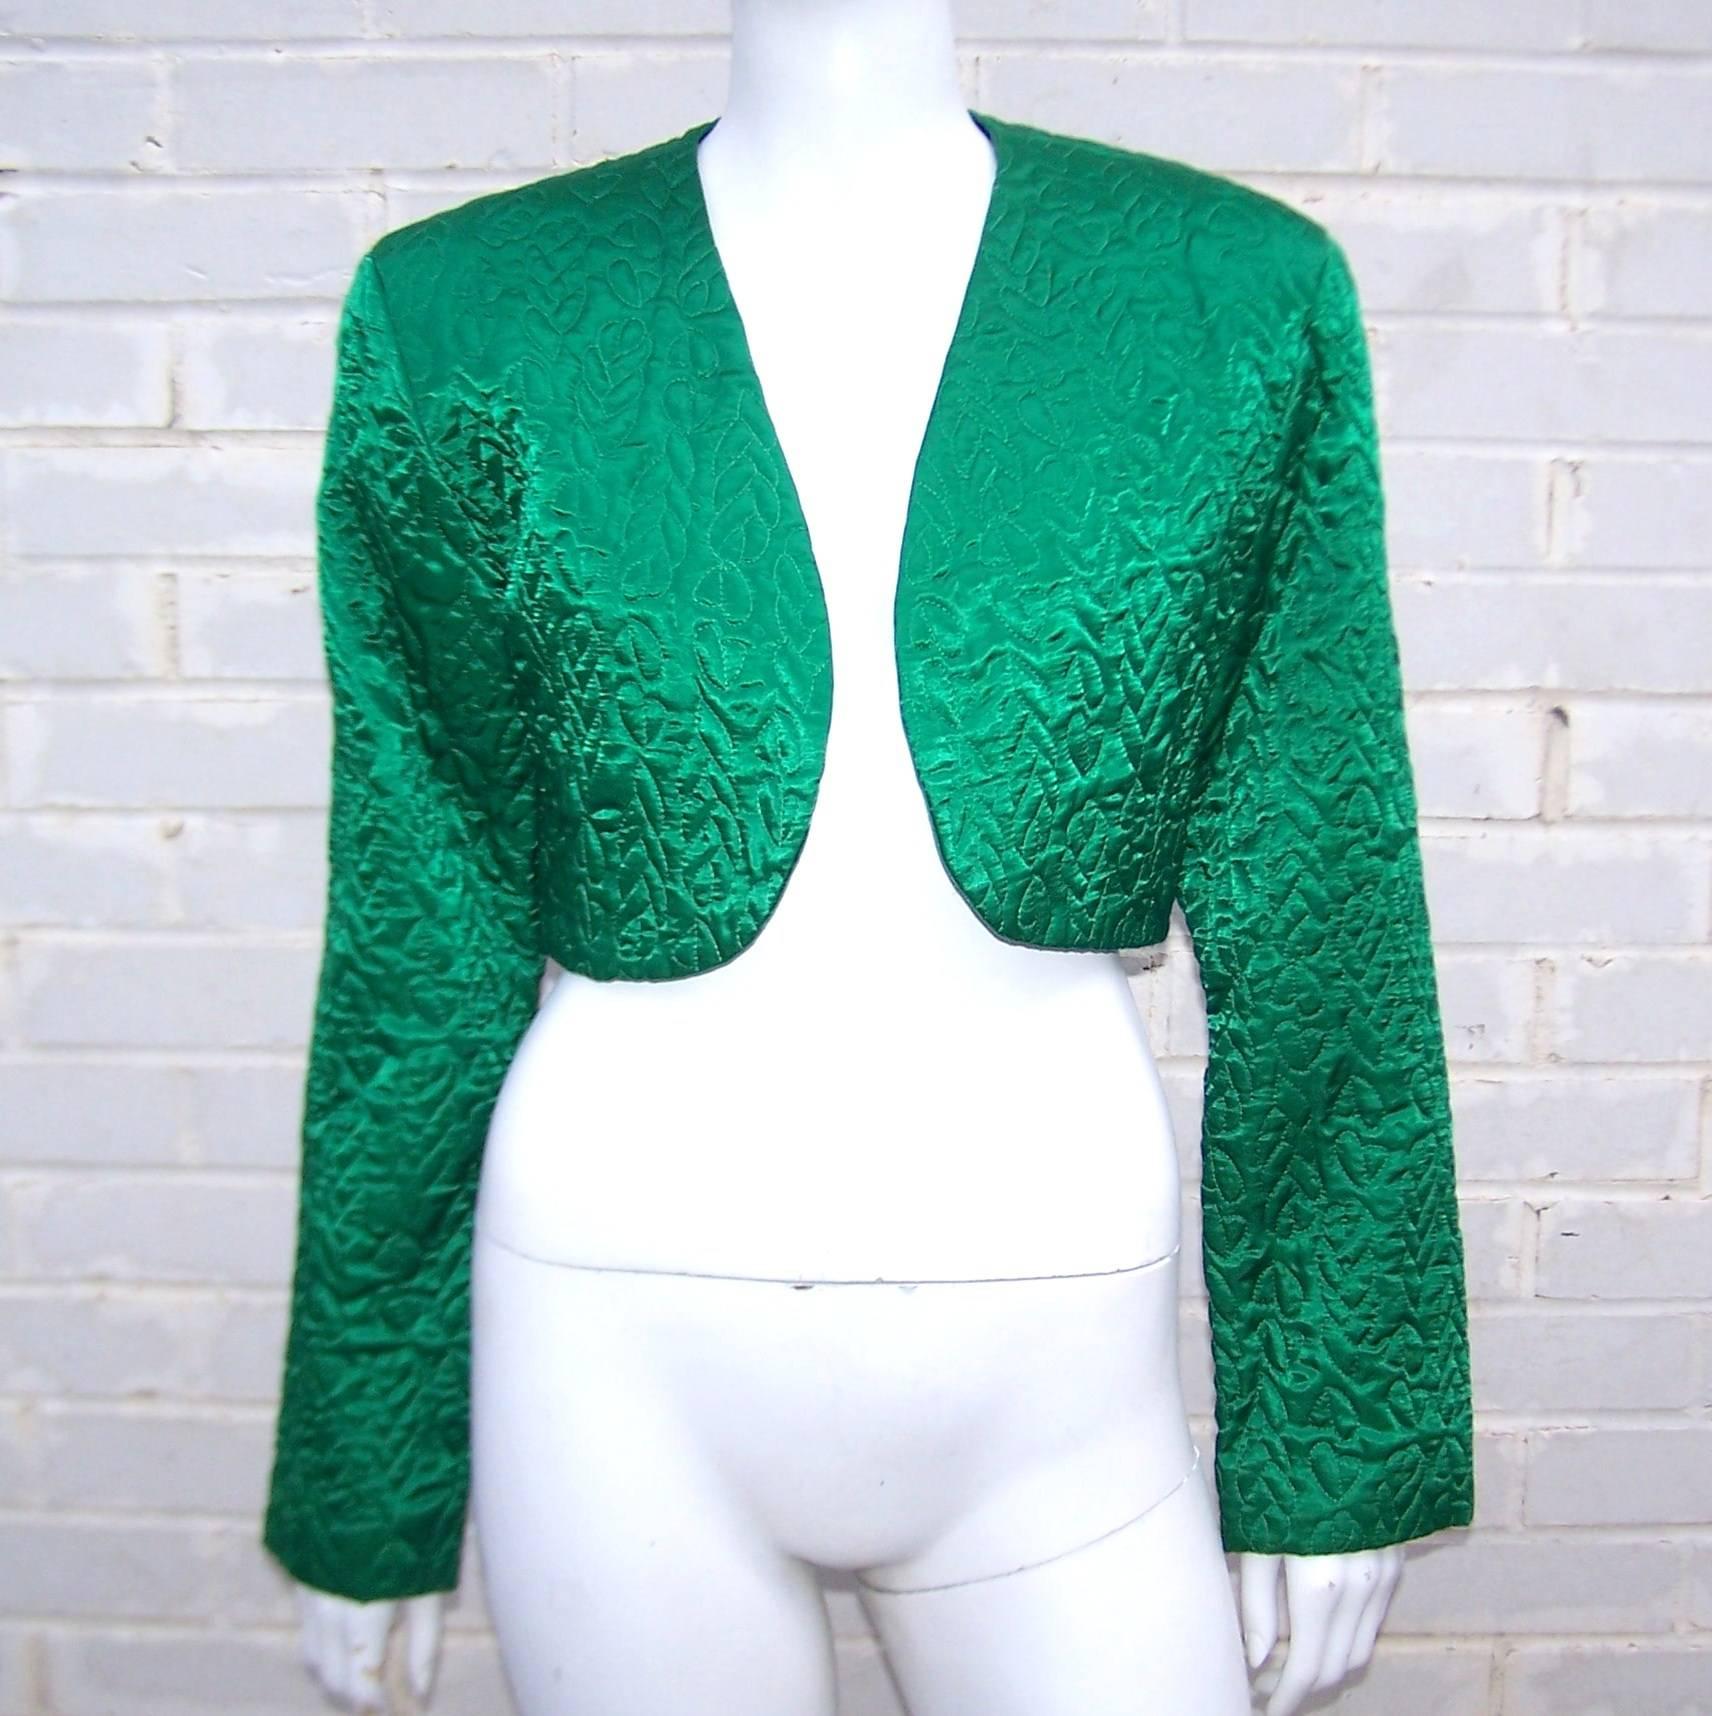 This C.1980 Perry Ellis jacket is a beautiful jewel tone color with quilting for added visual interest.  The boxy cropped silhouette is structured at the shoulders but comfortably open through the bodice designed to be worn without closure.  The